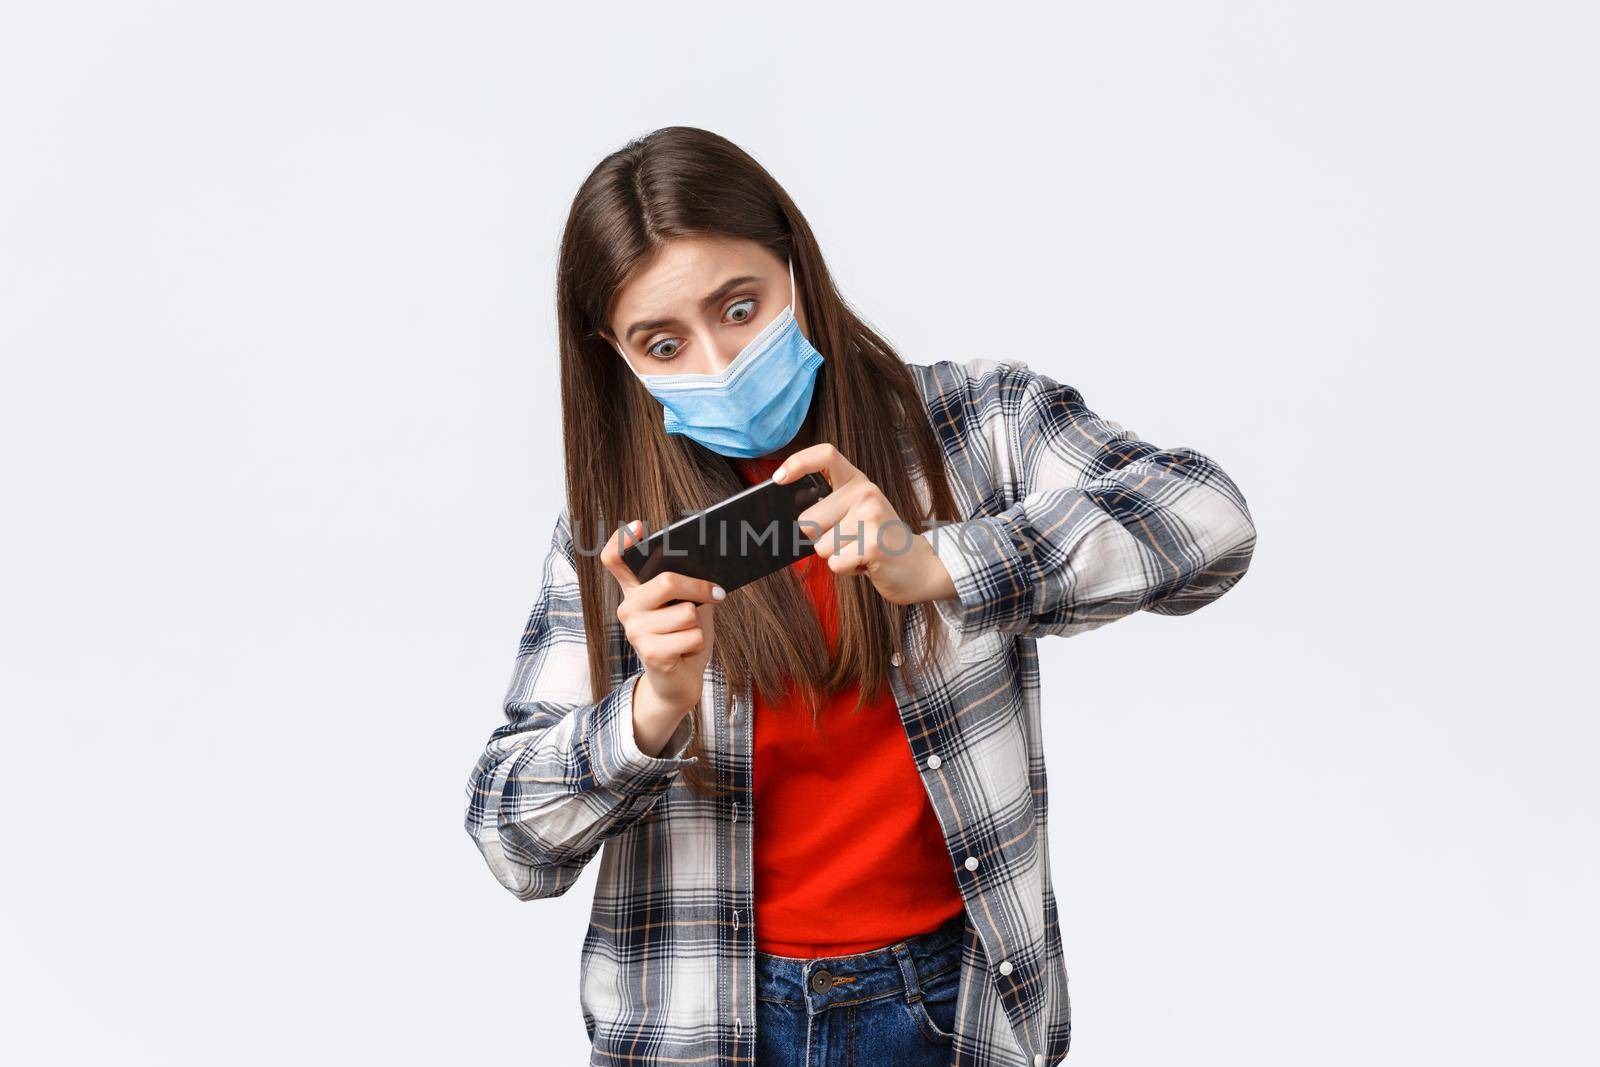 Different emotions, covid-19 pandemic, coronavirus self-quarantine and social distancing concept. Focused and entertained woman in medical mask playing mobile game, tilting body, difficult level by Benzoix